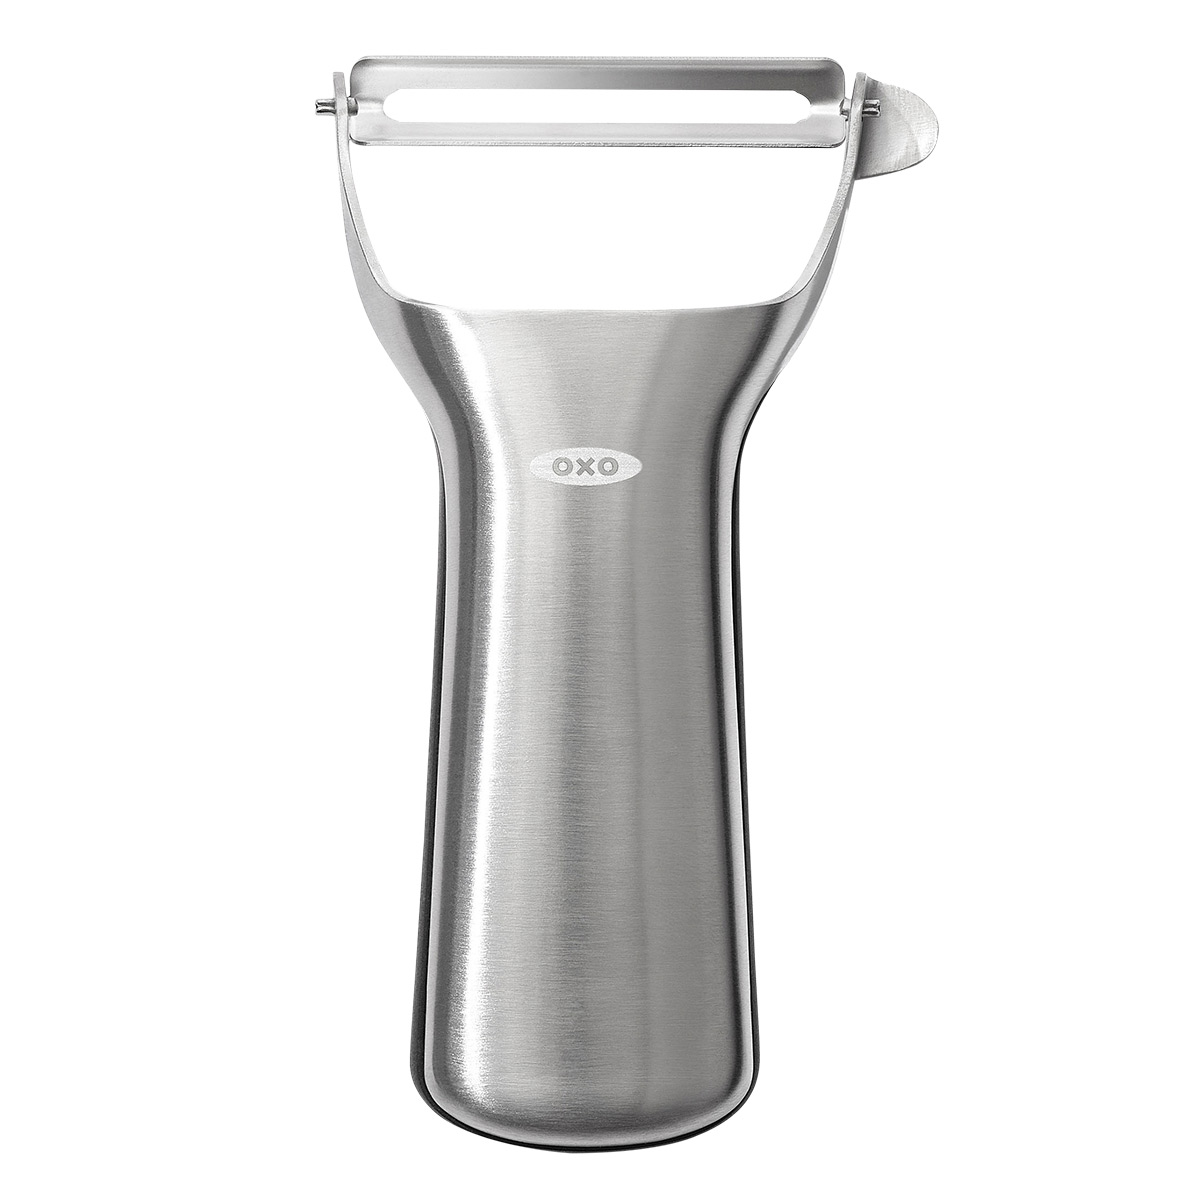 https://www.containerstore.com/catalogimages/427814/10086170-OXO-Steel-Y-VEN5.jpg